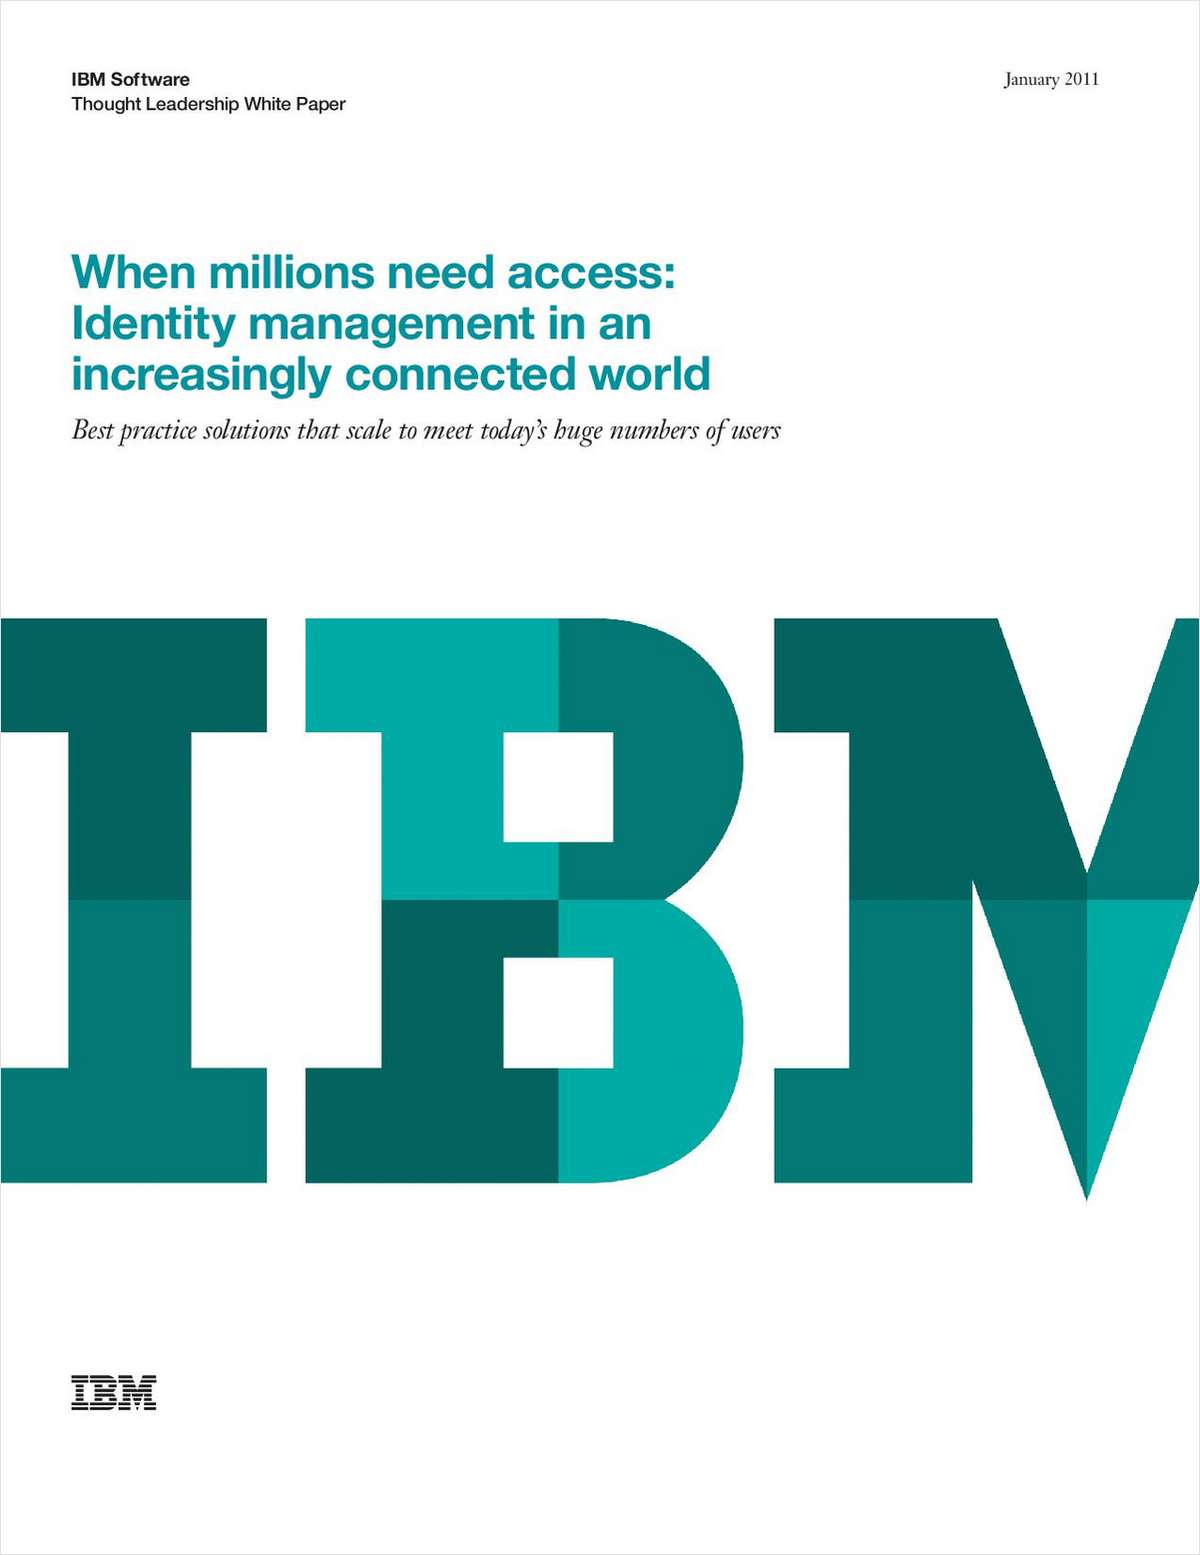 When Millions Need Access: Identity Management in an Increasingly Connected World